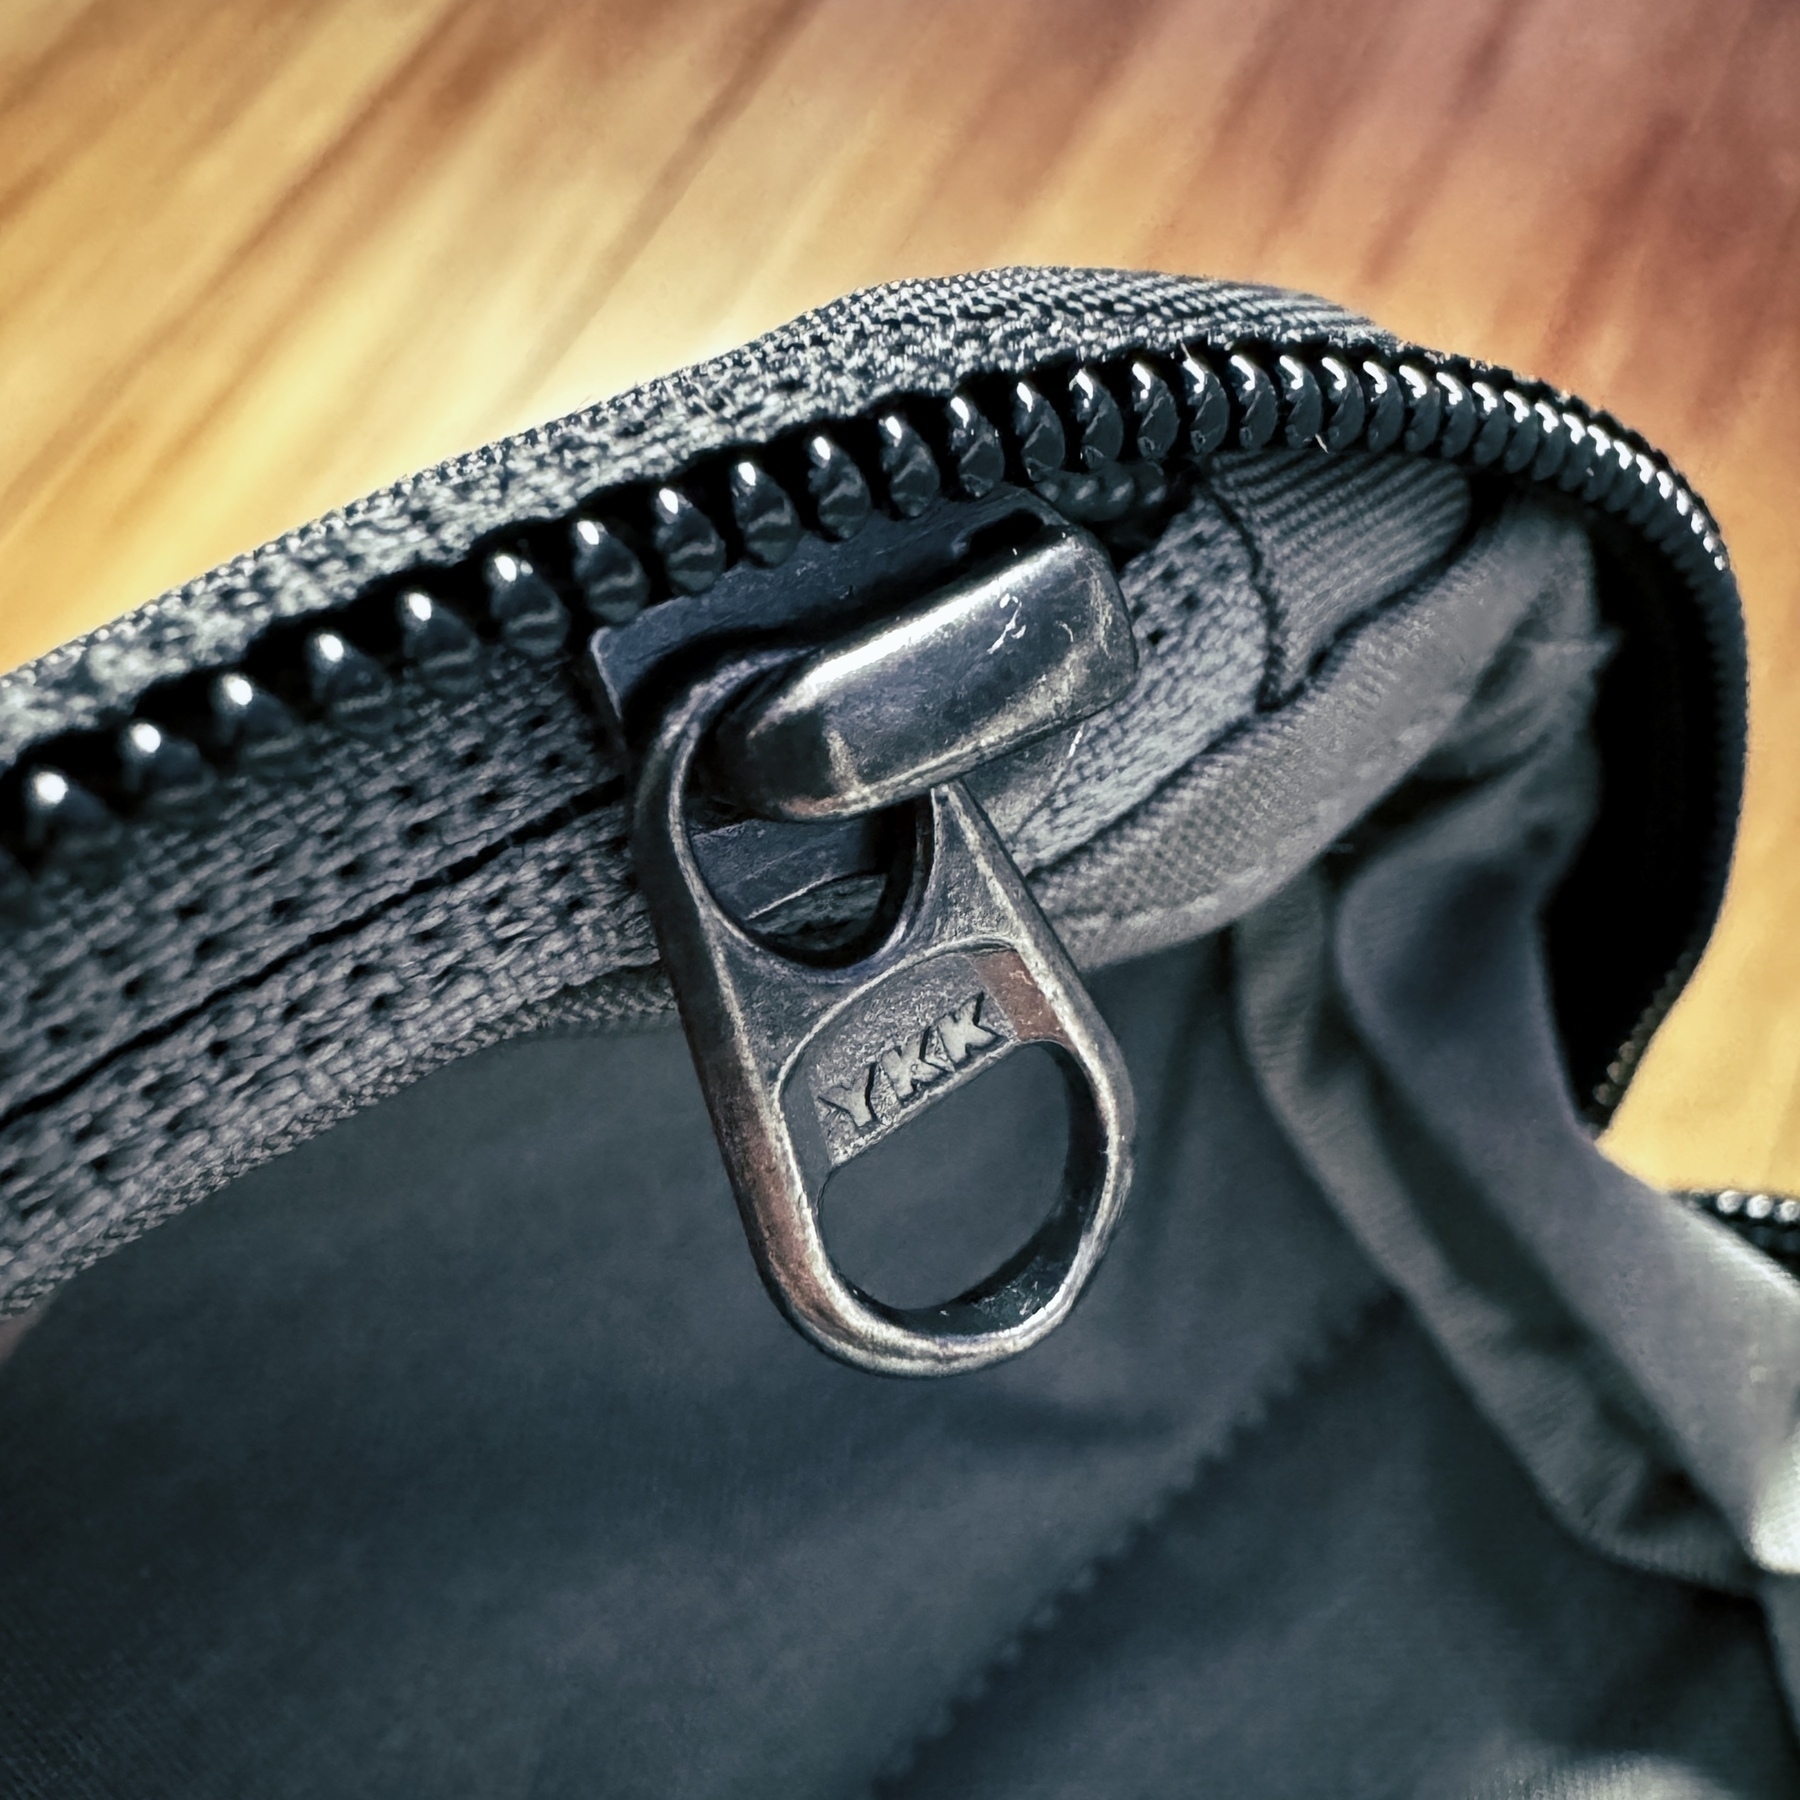 close up photo of a black nylon accessory pouch and a steel YKK zipper